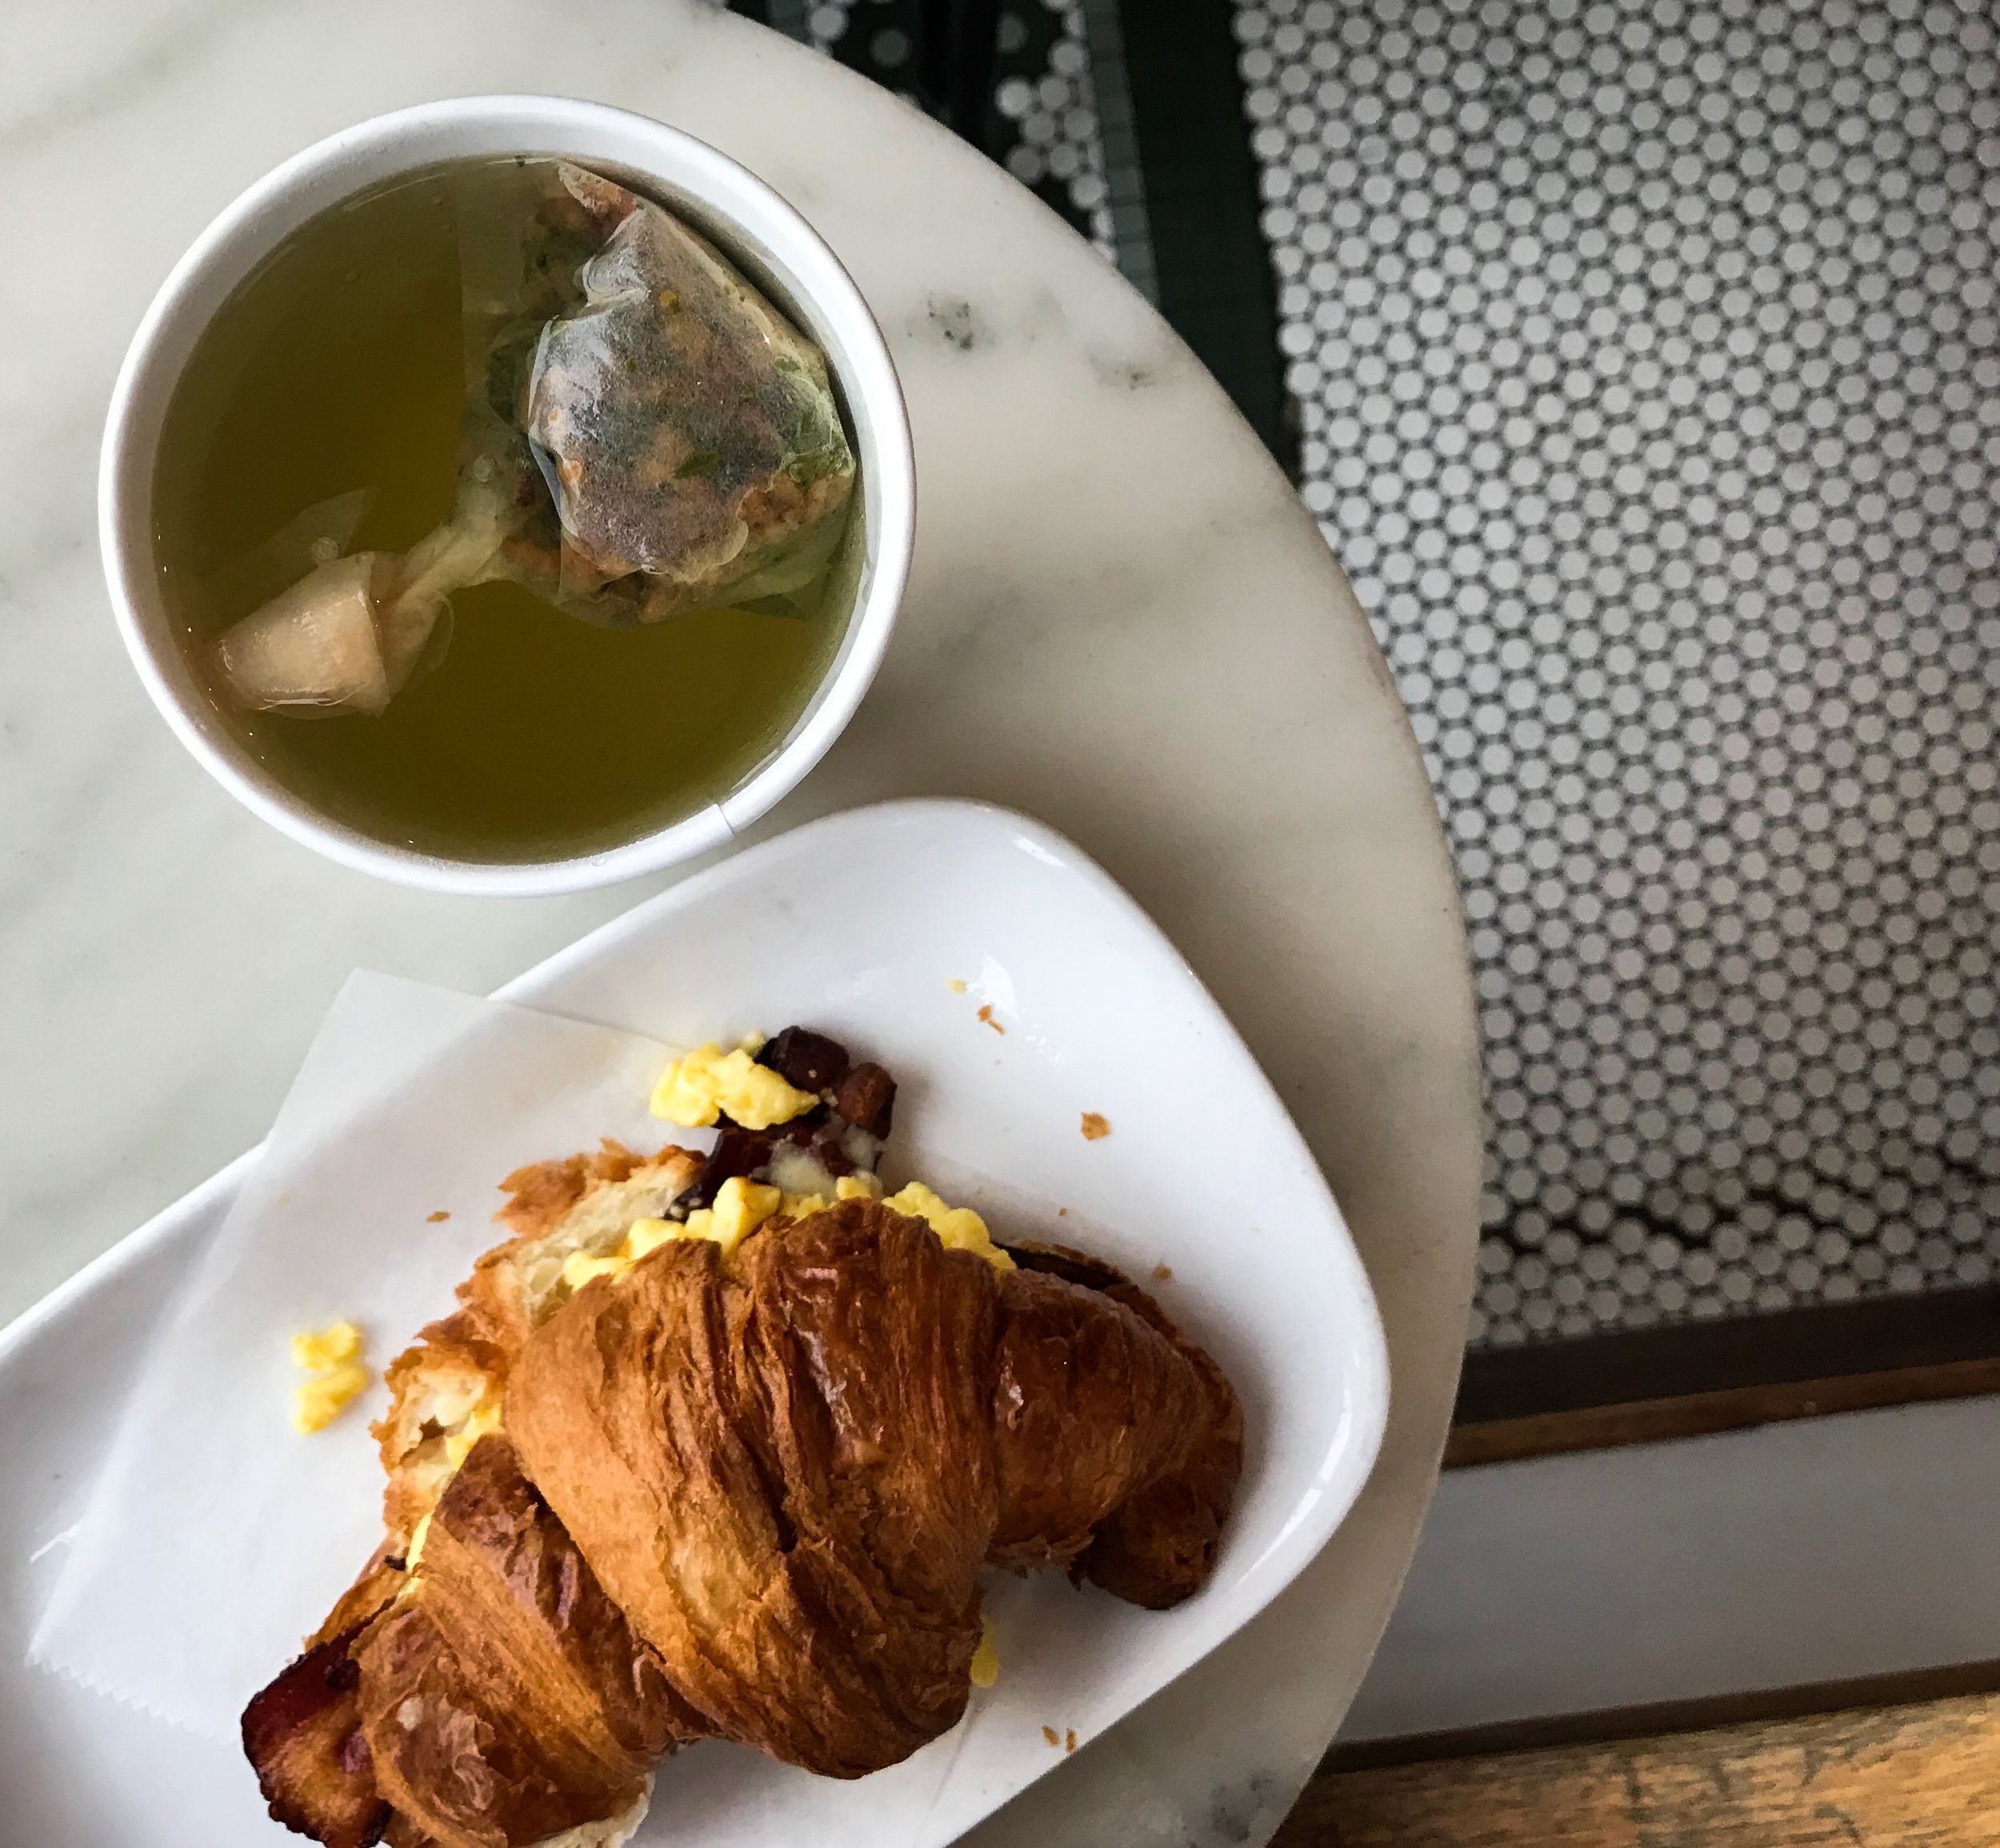  The 5 main food groups, as far as I'm concerned: genmaicha green tea, croissants, cheese, and eggs. Not pictured: dumplings. Also not pictured: NPR and podcasts on the importance of slowing down. 